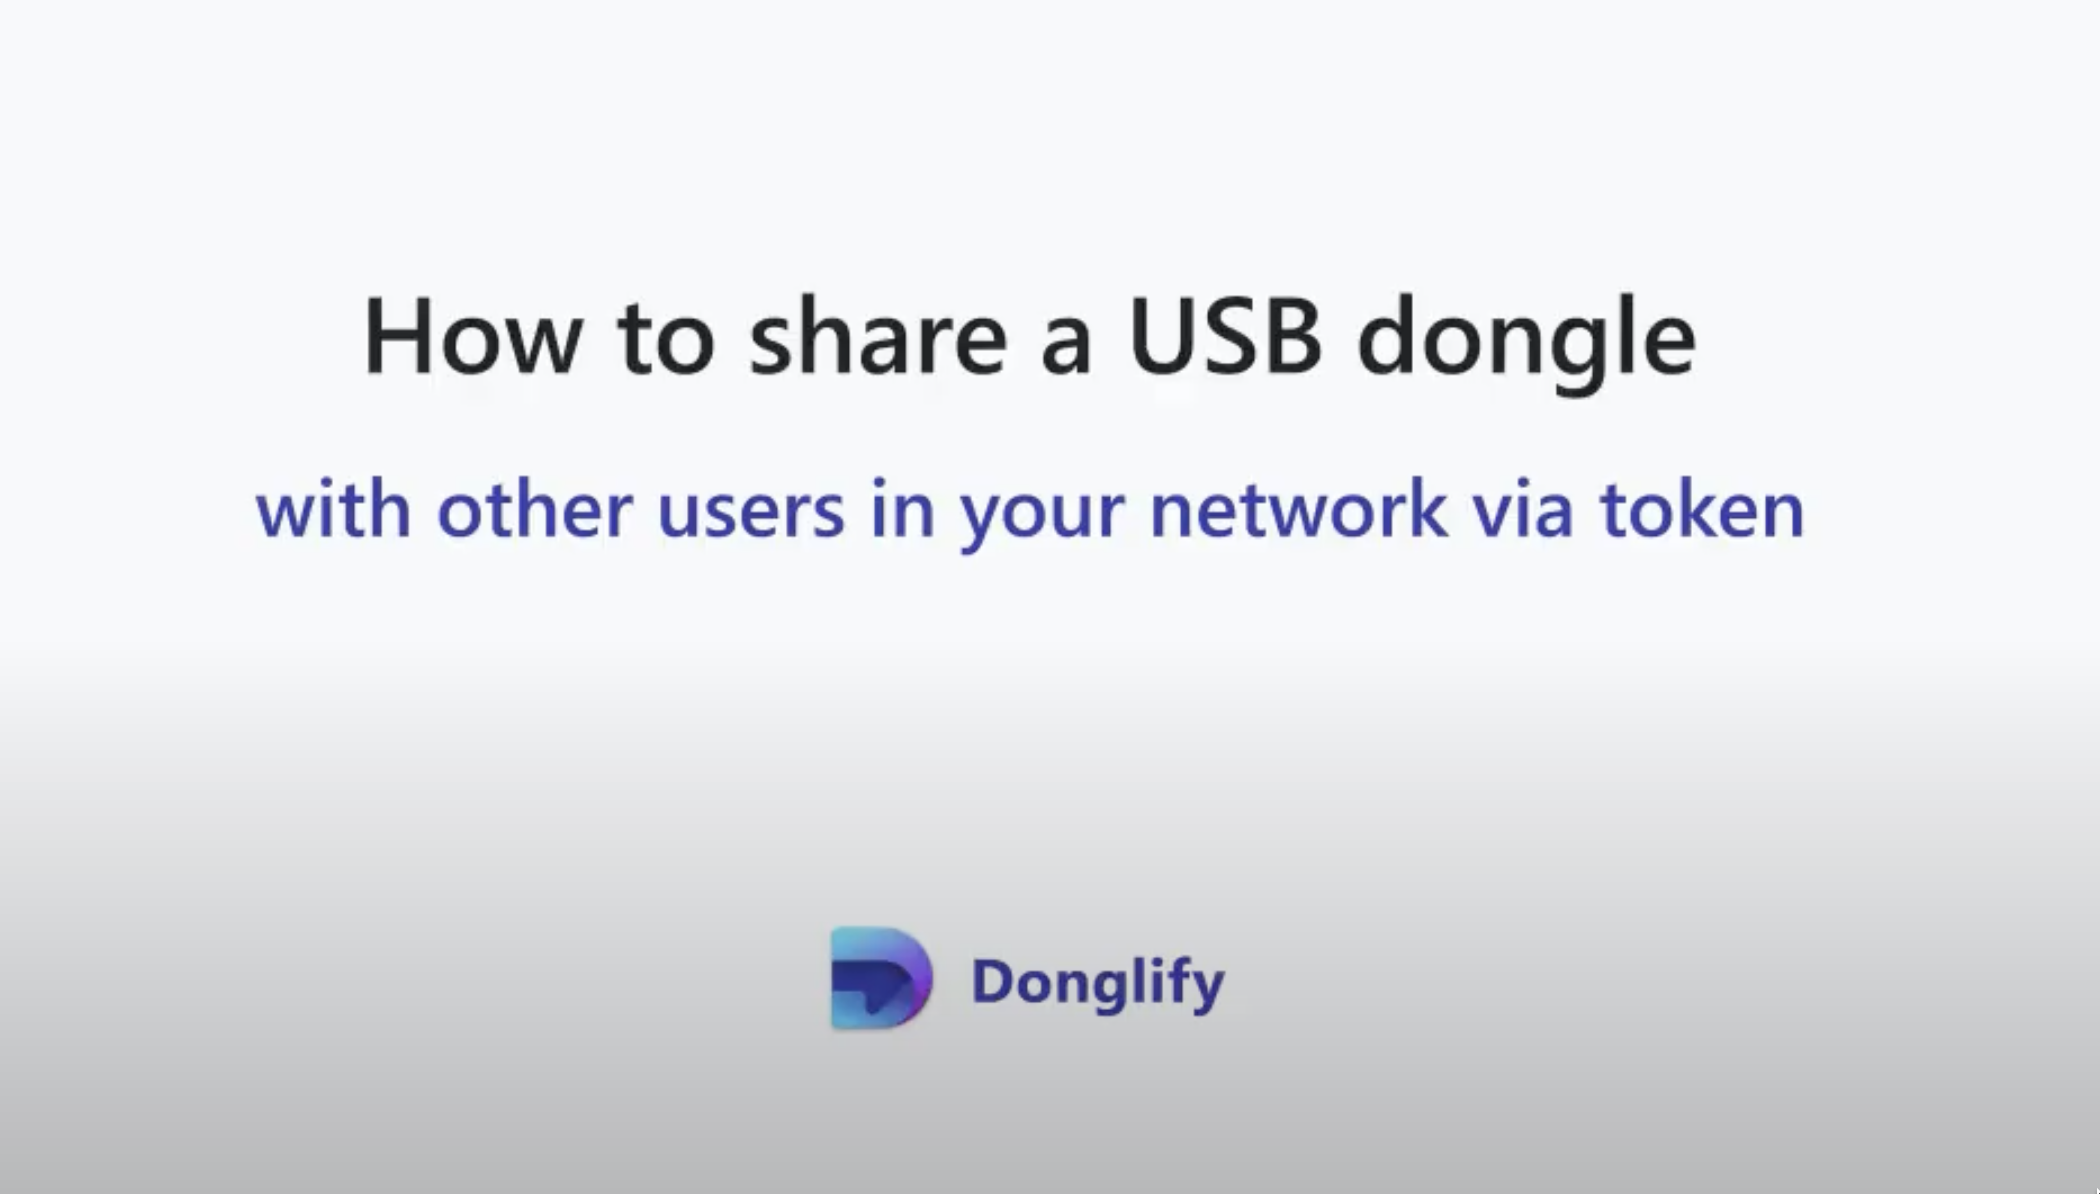  Donglify